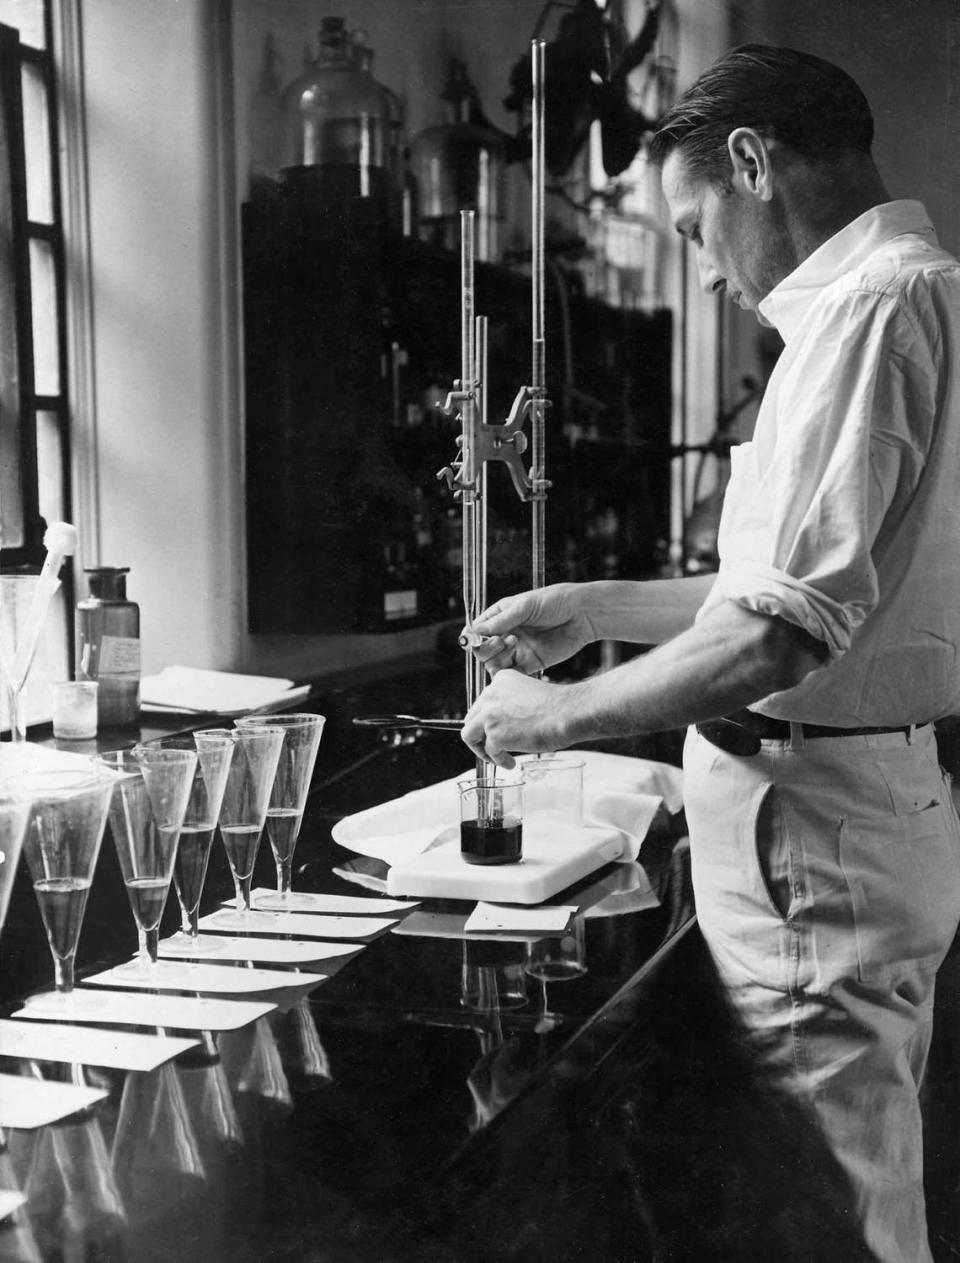 The research laboratory inside Narco, photographed in 1939. Photos from a newly published book, “The Narcotic Farm, The Rise and Fall of America’s First Prison for Drug Addicts” by Nancy D. Campbell, JP Olsen and Luke Walden. The book traces the history of “The Narcotic Farm” out Leestown Road near Masterson Station in Lexington, Ky. Photo Credit: Arthur Rothstein, Kentucky Historical Society